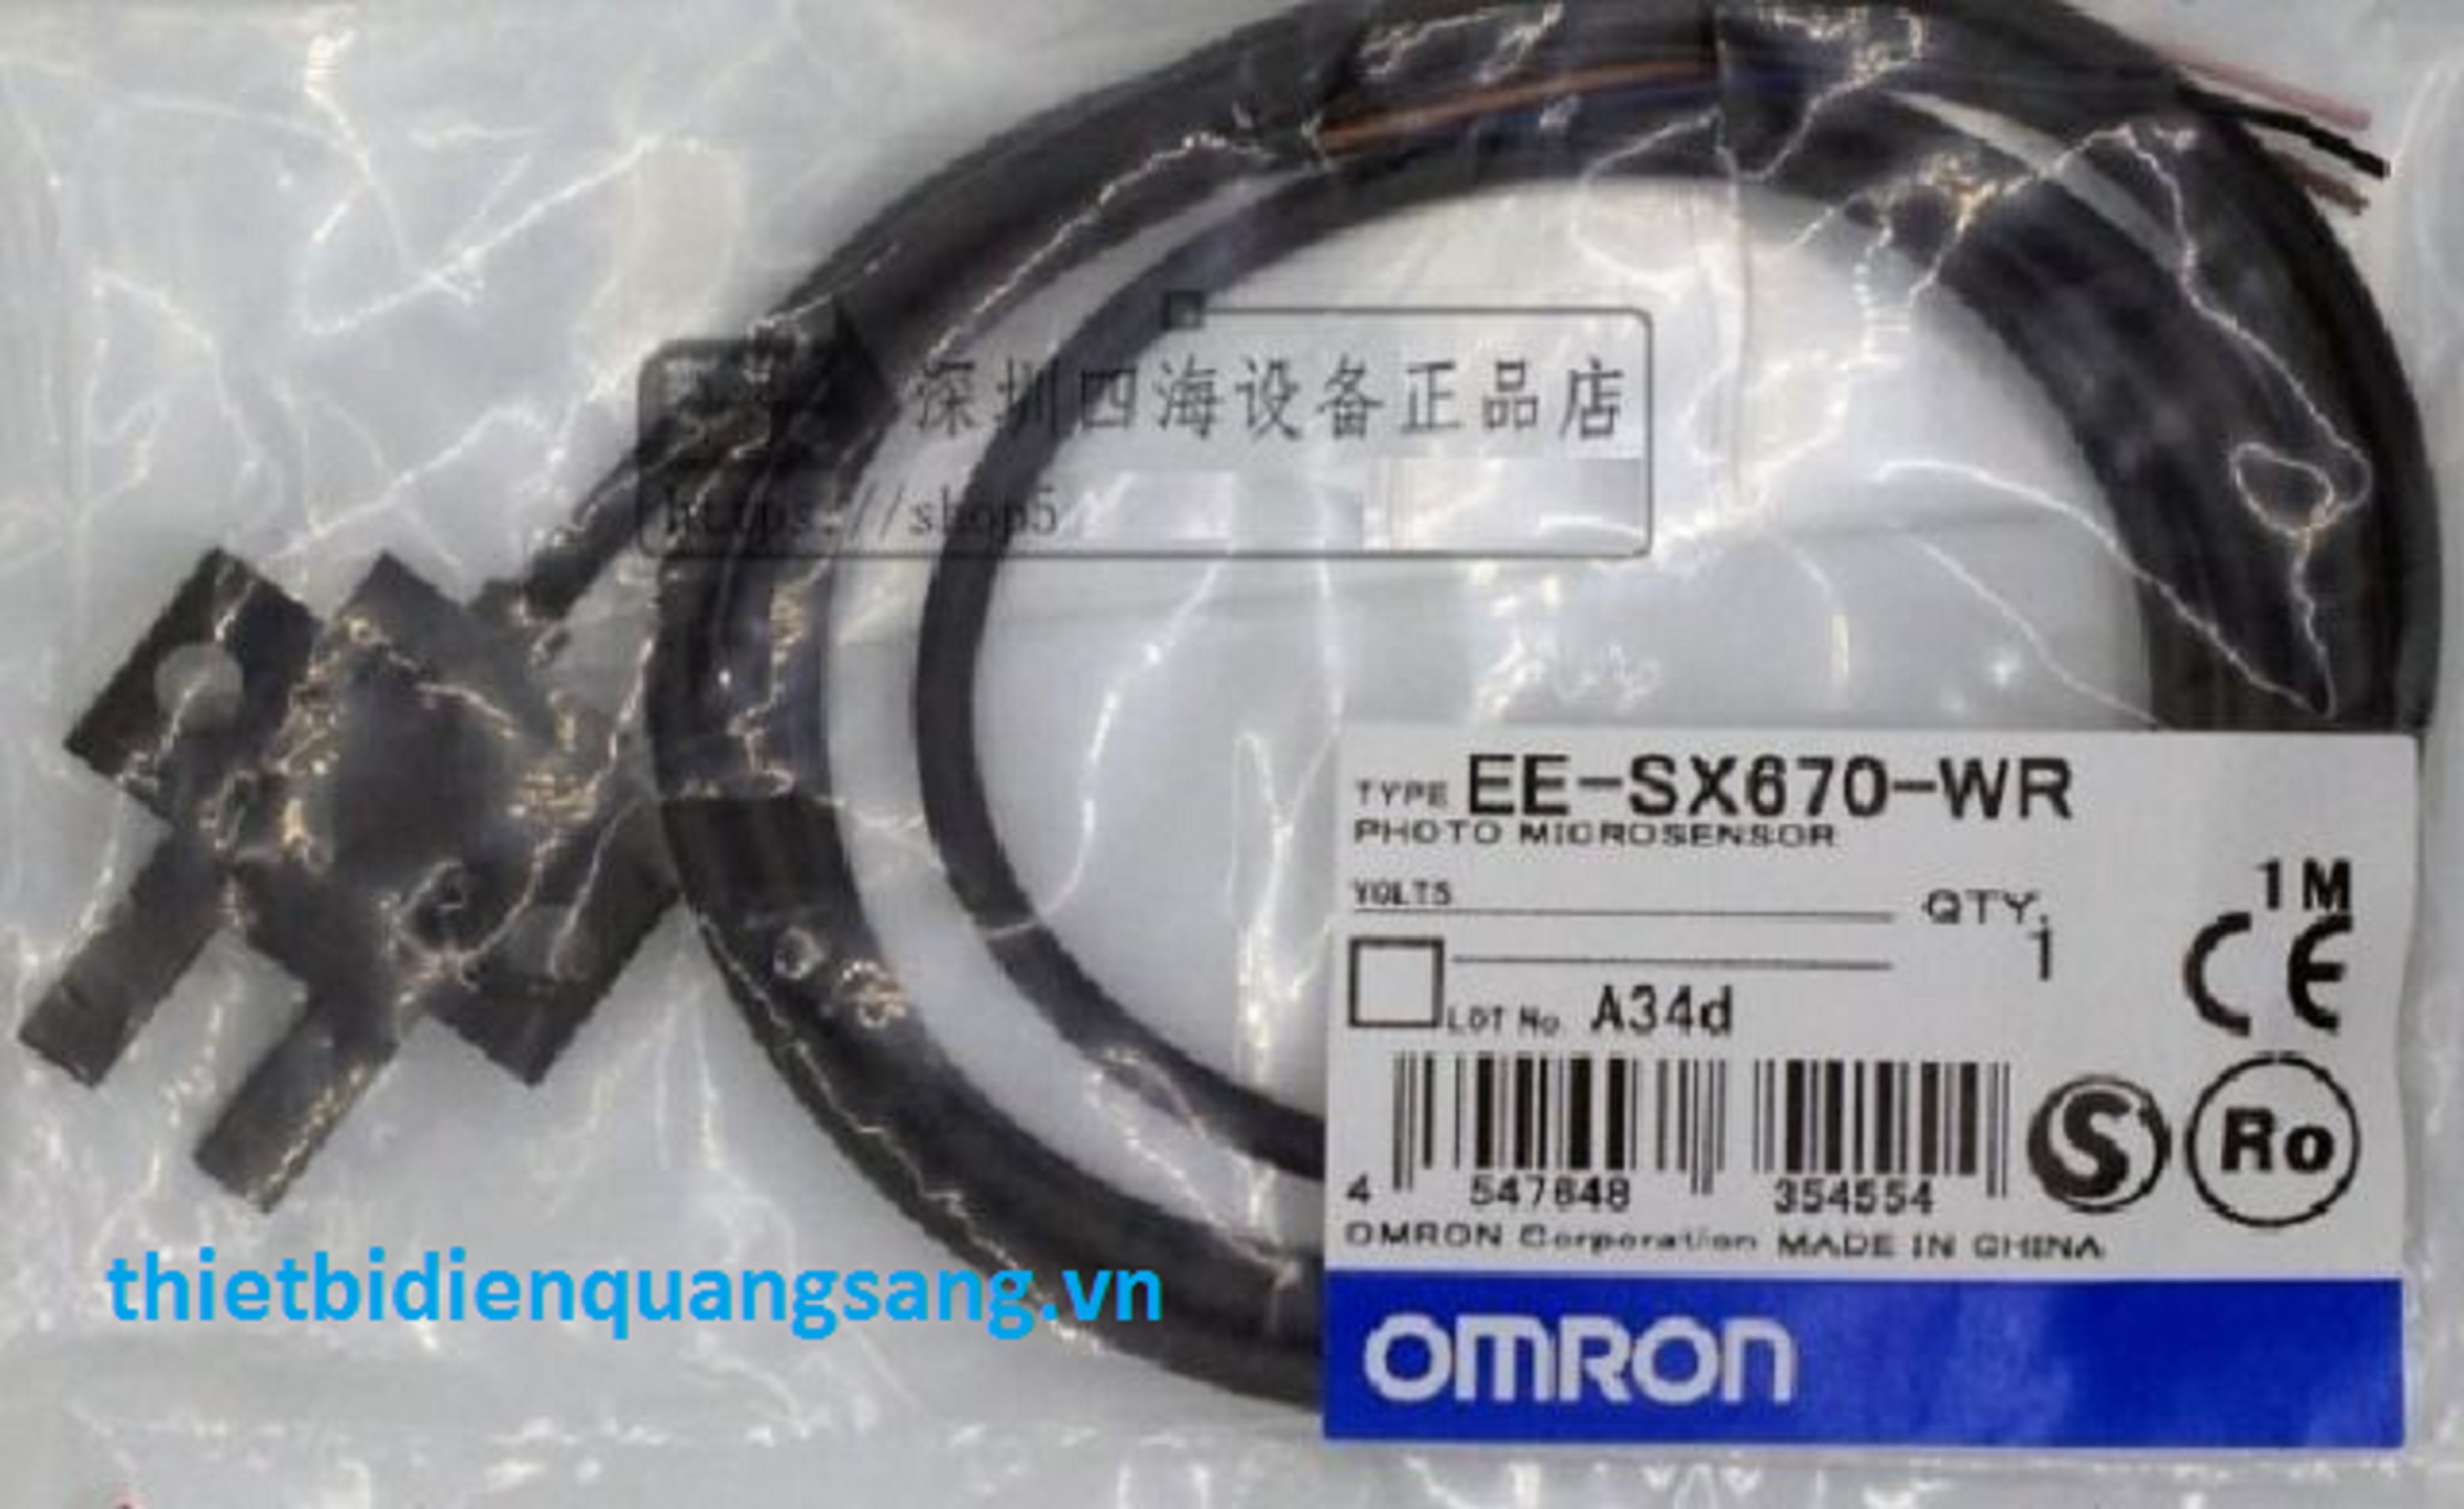 Omron EE-SX670-WR